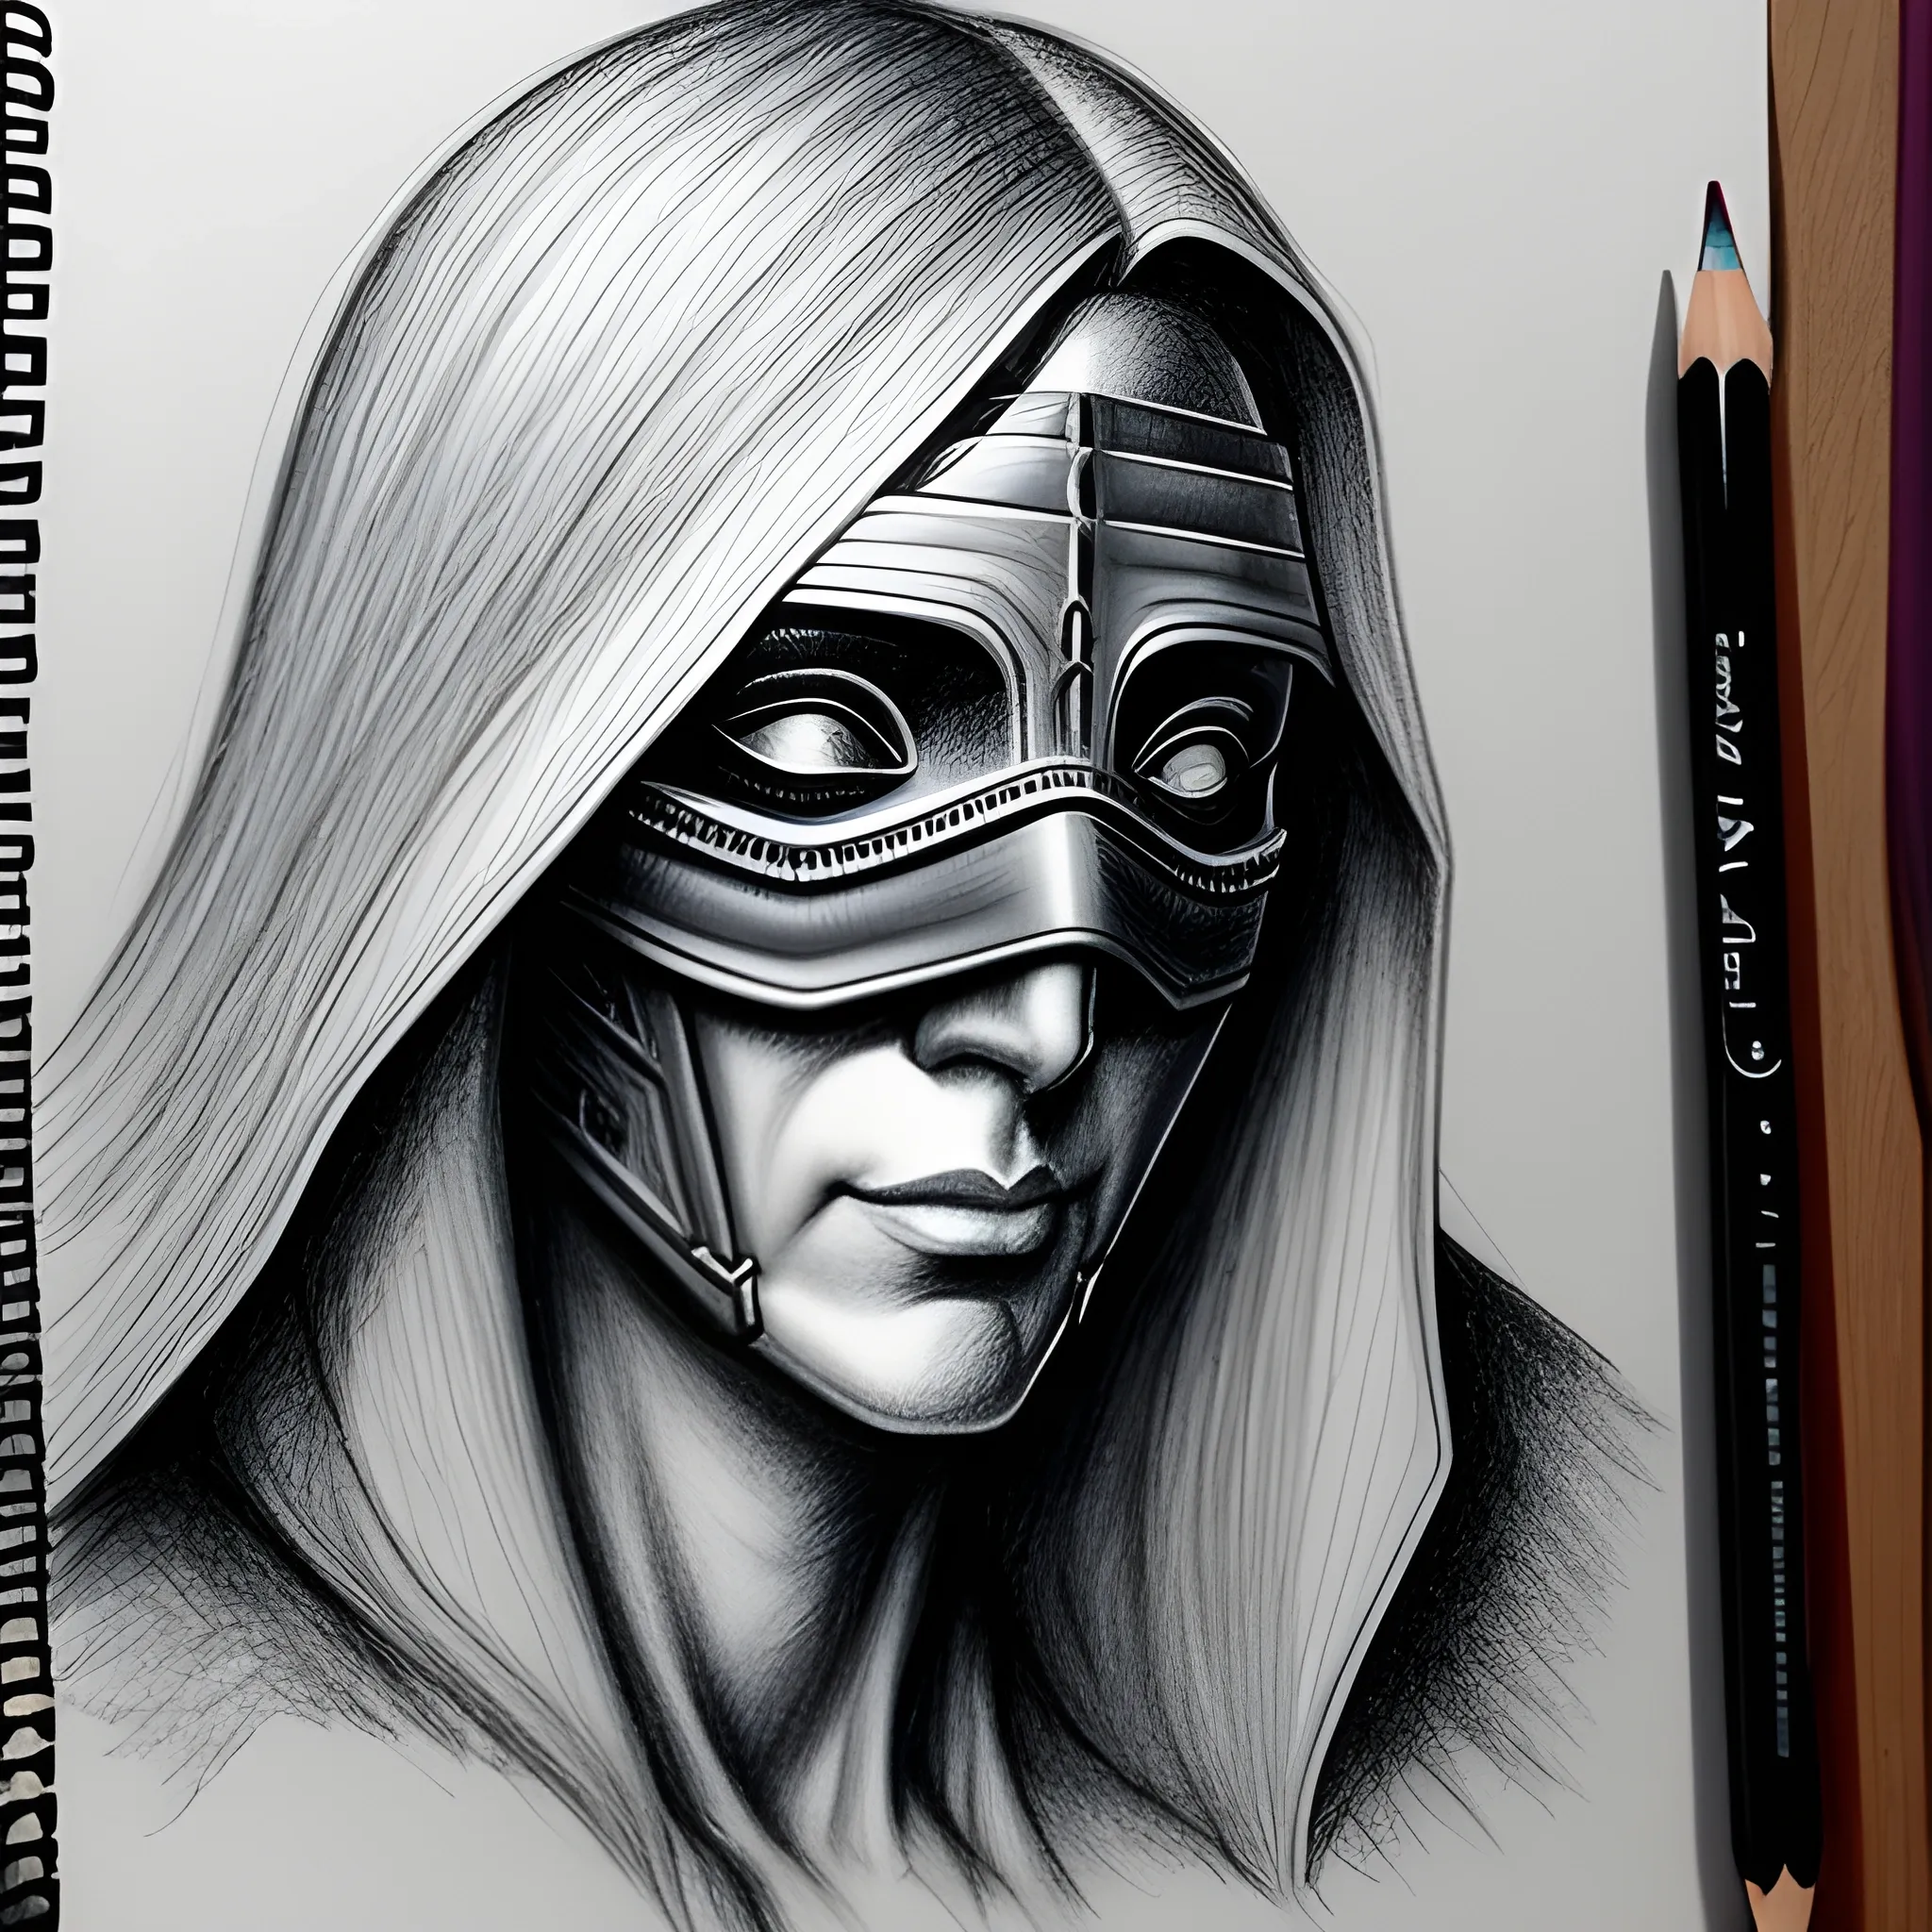 oracle, no background, detailed, young, young blind woman, mask covering eyes, arcane, mysterious, Pencil Sketch